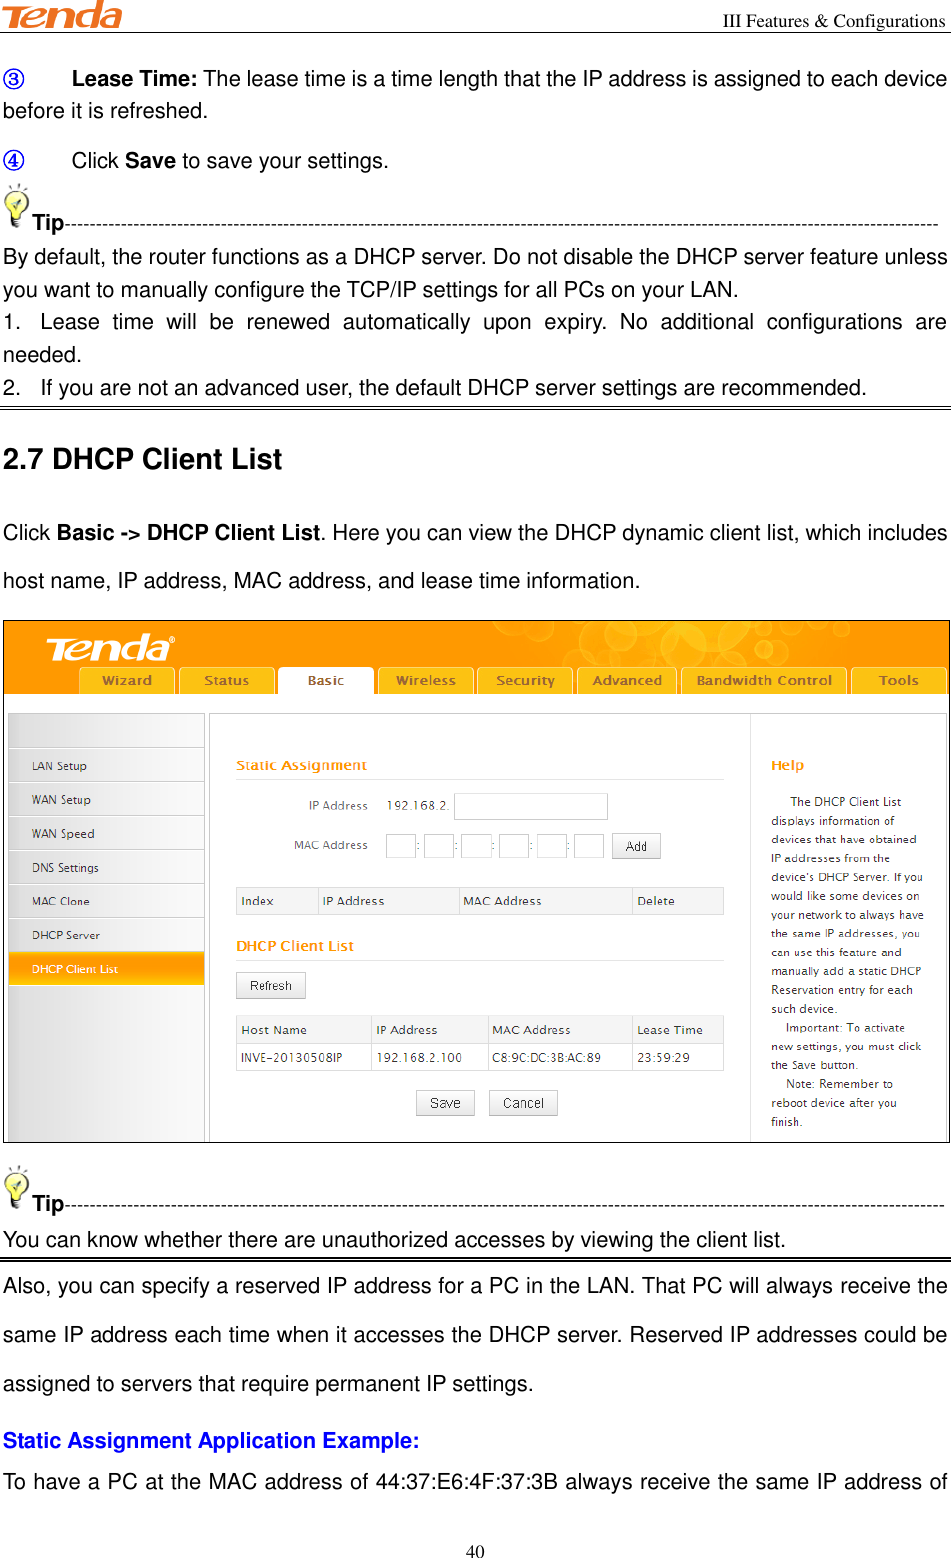                                                        III Features &amp; Configurations           40 ③ Lease Time: The lease time is a time length that the IP address is assigned to each device before it is refreshed. ④ Click Save to save your settings. Tip-------------------------------------------------------------------------------------------------------------------------------------------- By default, the router functions as a DHCP server. Do not disable the DHCP server feature unless you want to manually configure the TCP/IP settings for all PCs on your LAN. 1.  Lease  time  will  be  renewed  automatically  upon  expiry.  No  additional  configurations  are needed. 2.  If you are not an advanced user, the default DHCP server settings are recommended. 2.7 DHCP Client List Click Basic -&gt; DHCP Client List. Here you can view the DHCP dynamic client list, which includes host name, IP address, MAC address, and lease time information.  Tip--------------------------------------------------------------------------------------------------------------------------------------------- You can know whether there are unauthorized accesses by viewing the client list. Also, you can specify a reserved IP address for a PC in the LAN. That PC will always receive the same IP address each time when it accesses the DHCP server. Reserved IP addresses could be assigned to servers that require permanent IP settings. Static Assignment Application Example: To have a PC at the MAC address of 44:37:E6:4F:37:3B always receive the same IP address of 